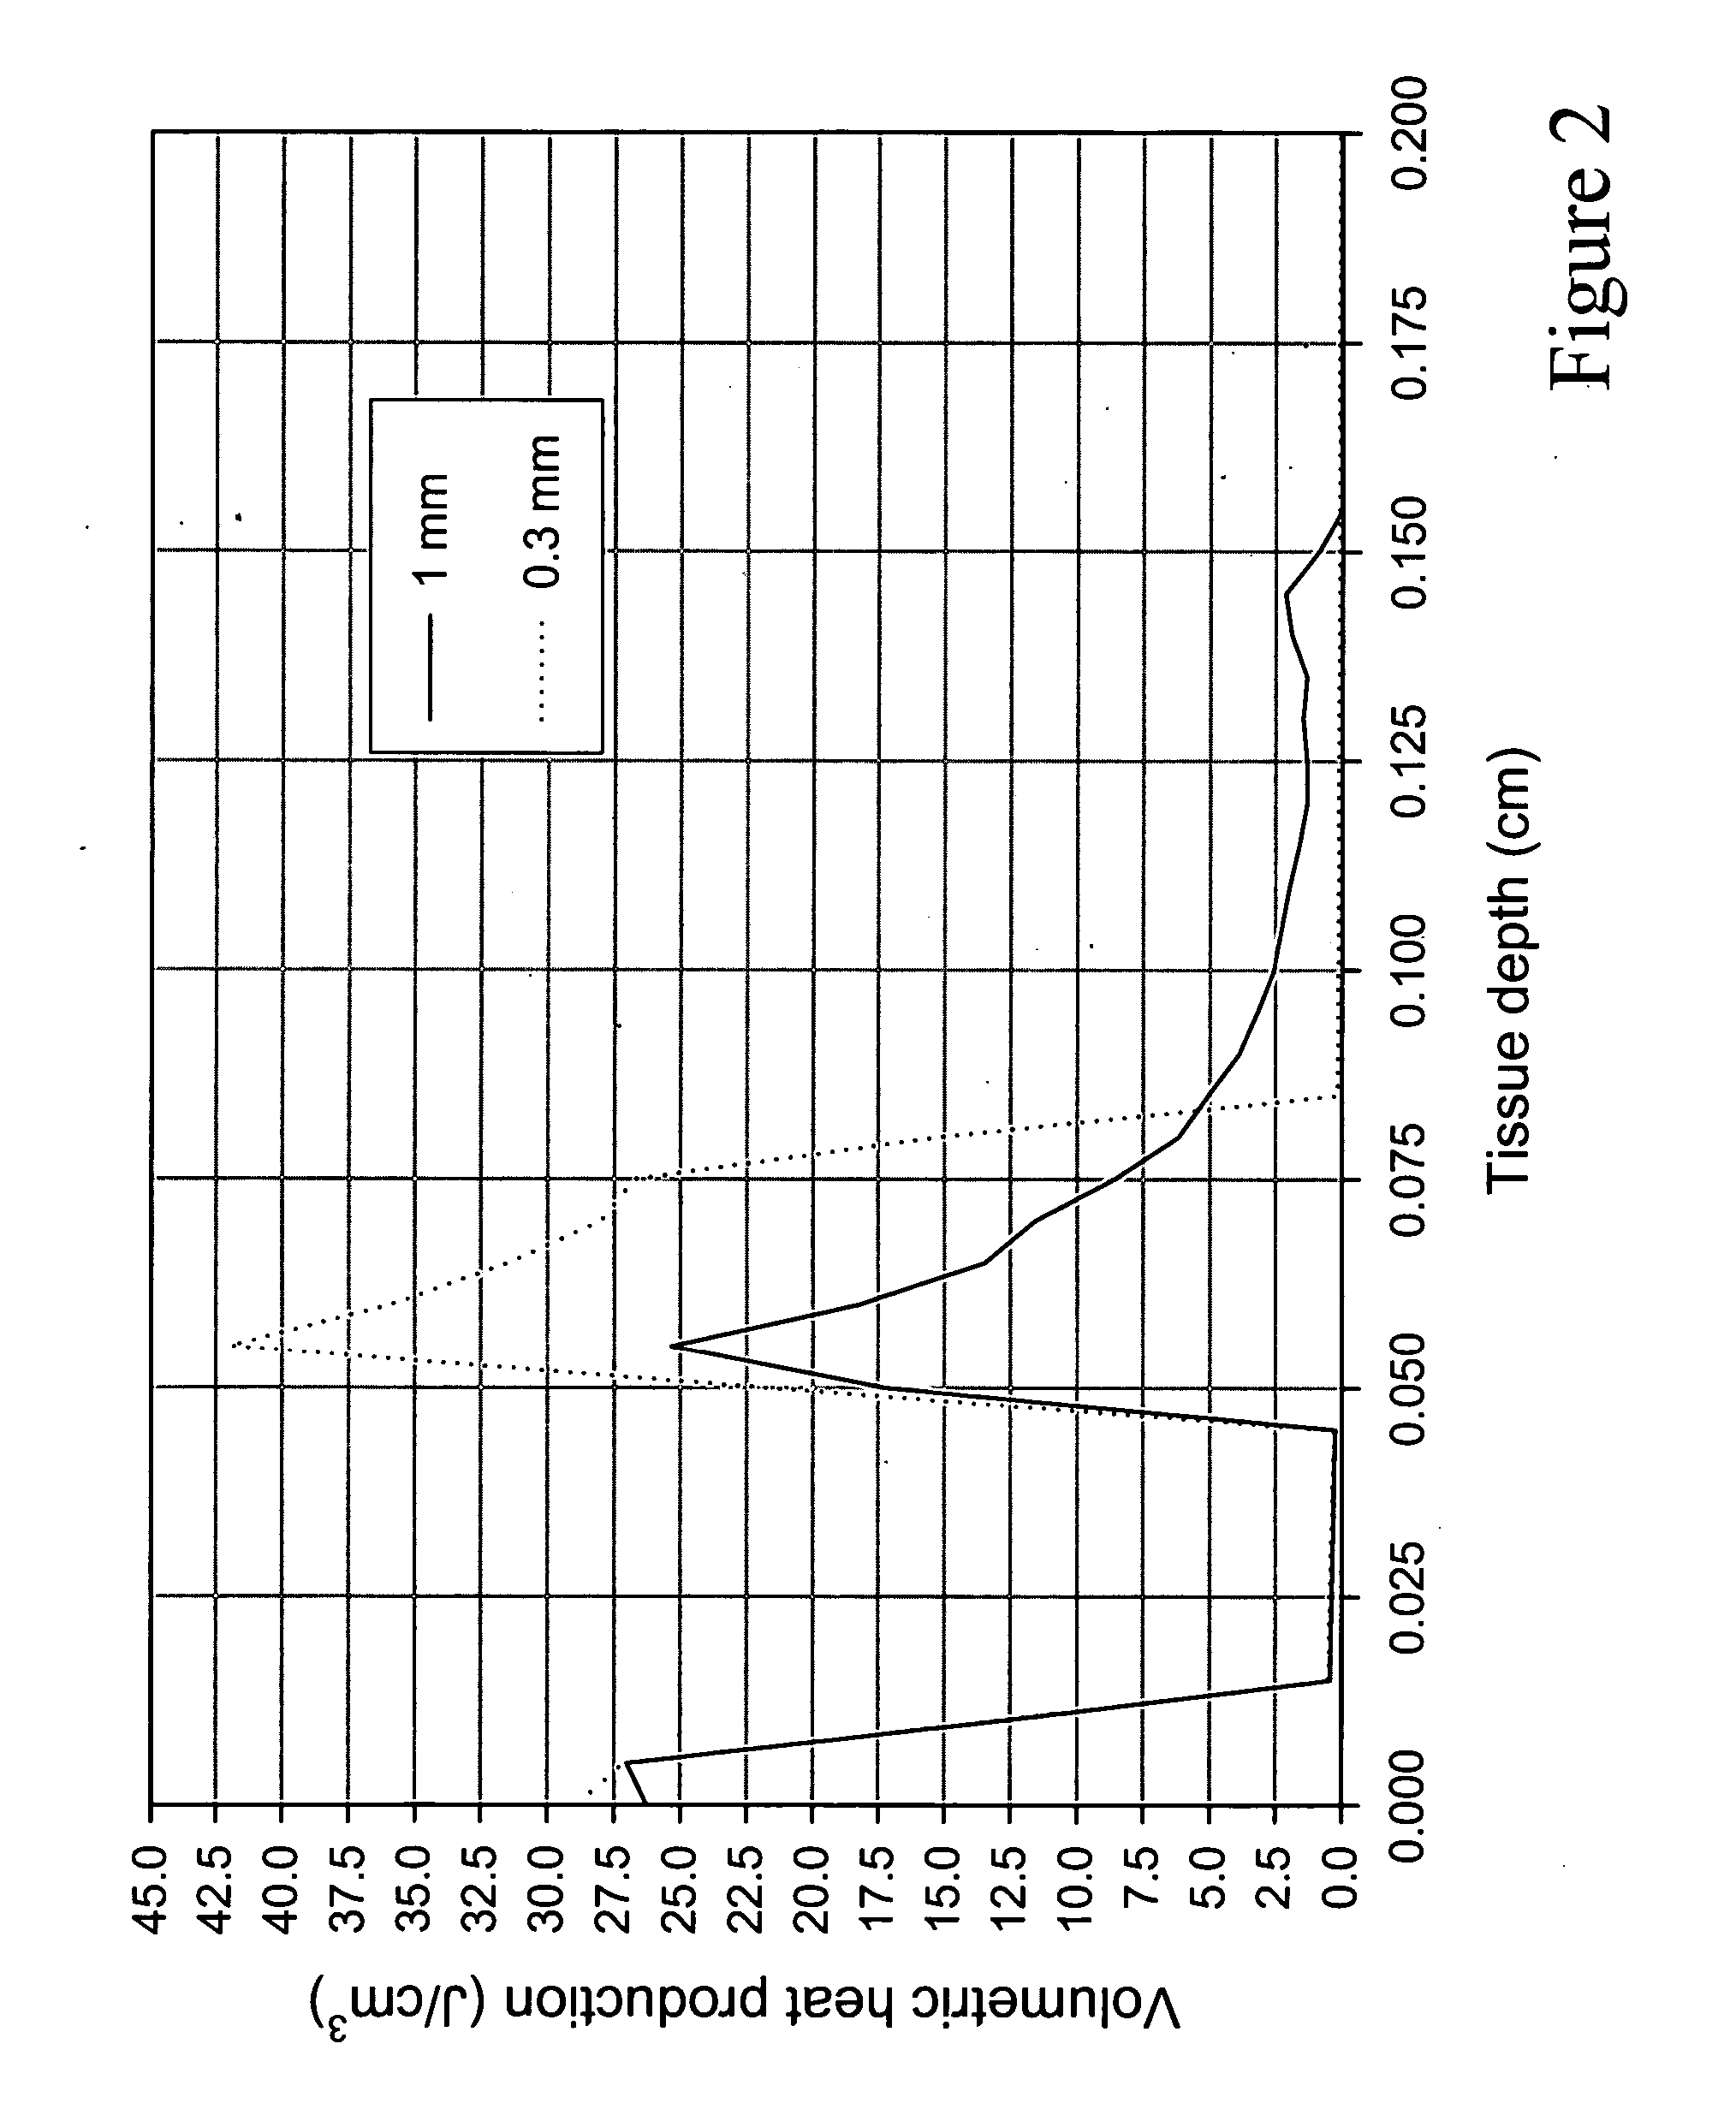 Compression device for a laser handpiece